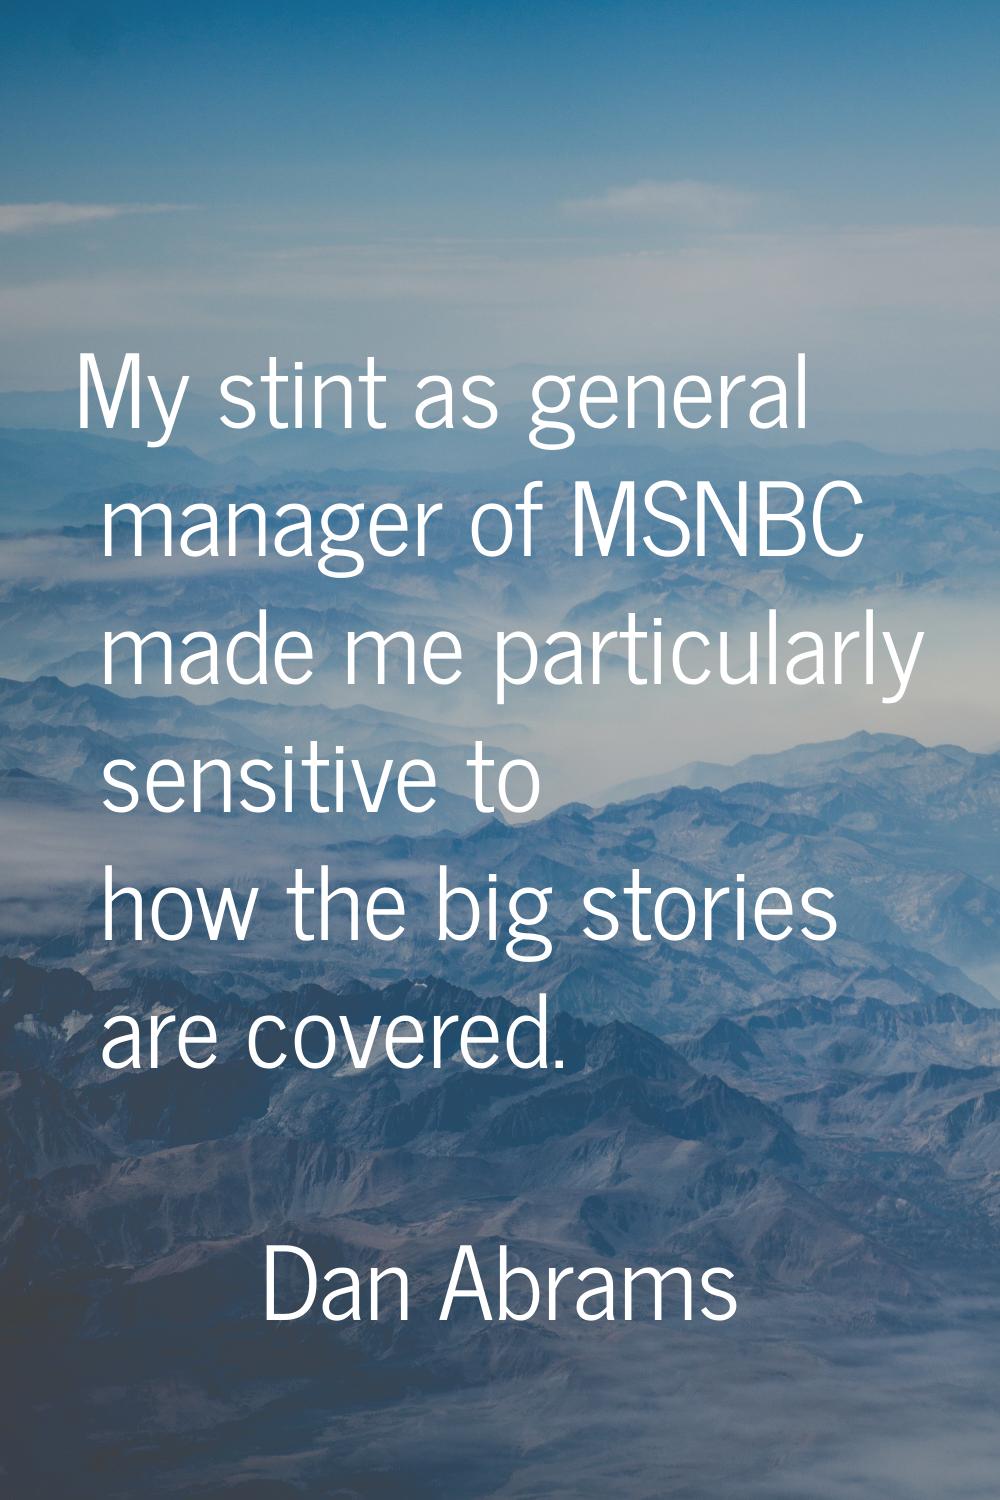 My stint as general manager of MSNBC made me particularly sensitive to how the big stories are cove